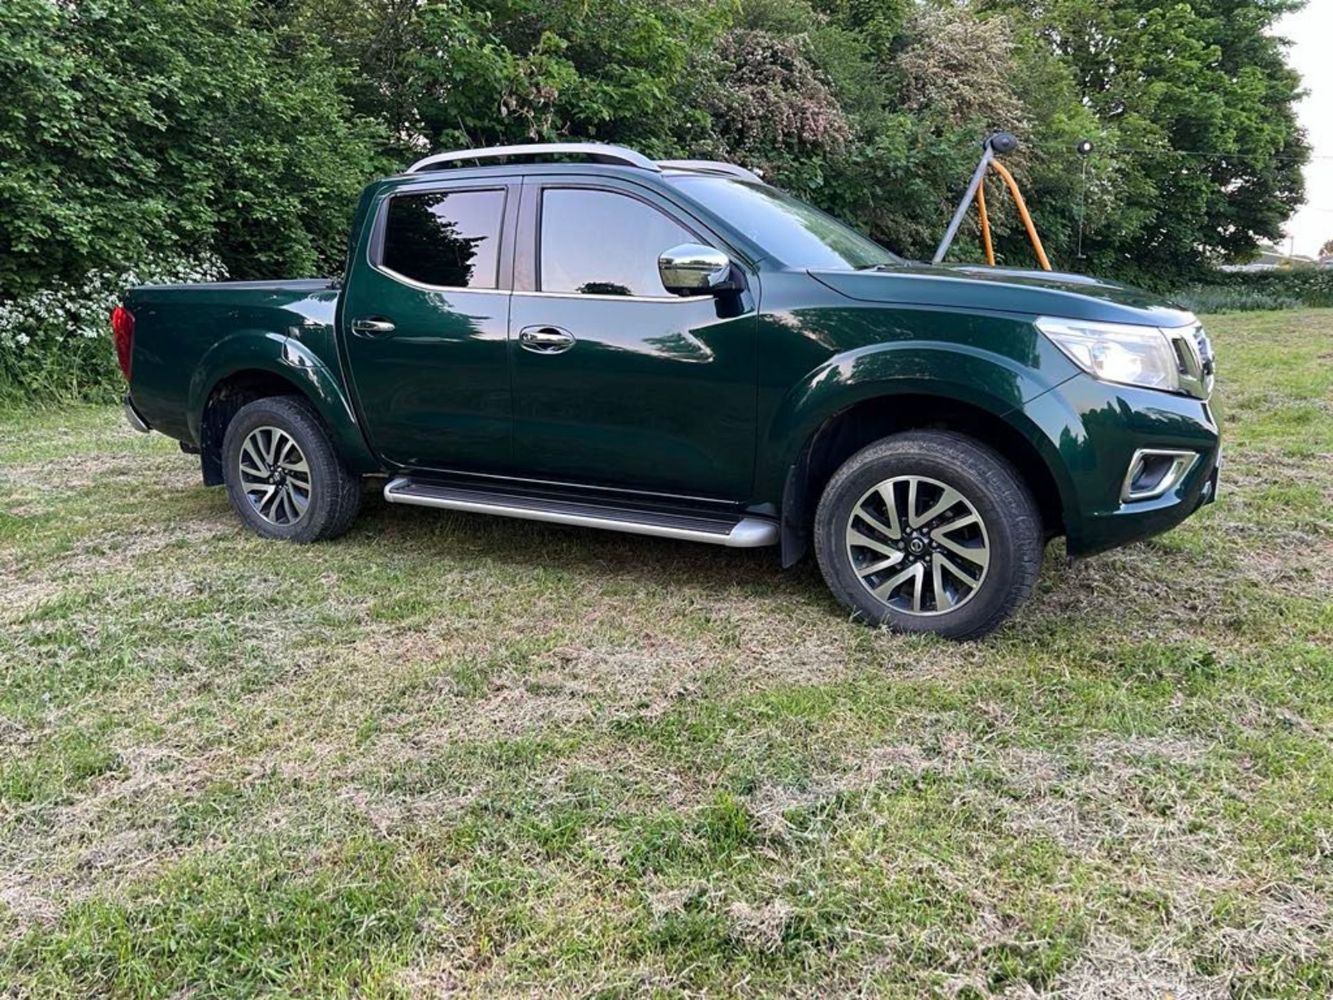 WEDNESDAY 8PM! 2019 NISSAN NAVARA TEKNA 190 4WD, MANITOU, TEREX, BOMAG, PLYMOUTH PROWLER, EV VEHICLES, TRACTORS, MOWERS, VANS & MUCH MORE!